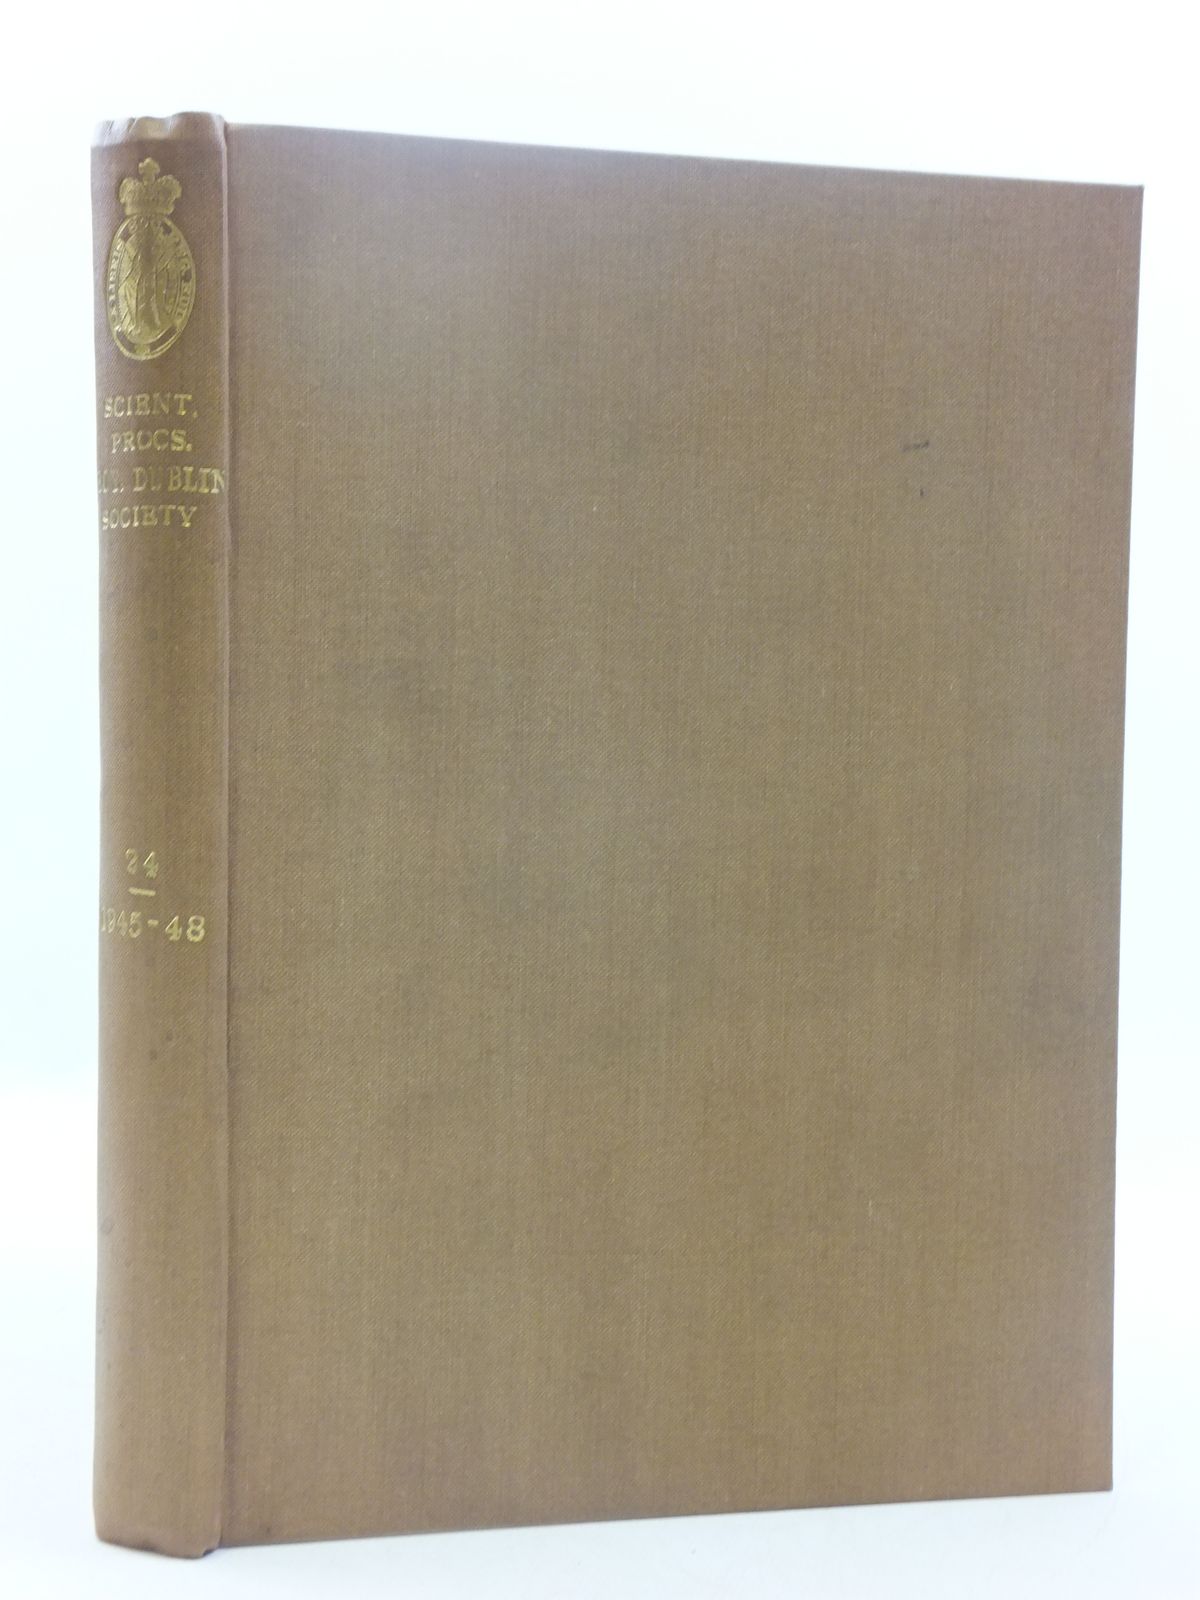 Photo of THE SCIENTIFIC PROCEEDINGS OF THE ROYAL DUBLIN SOCIETY VOLUME 24 (1945-48) published by Royal Dublin Society (STOCK CODE: 1605208)  for sale by Stella & Rose's Books